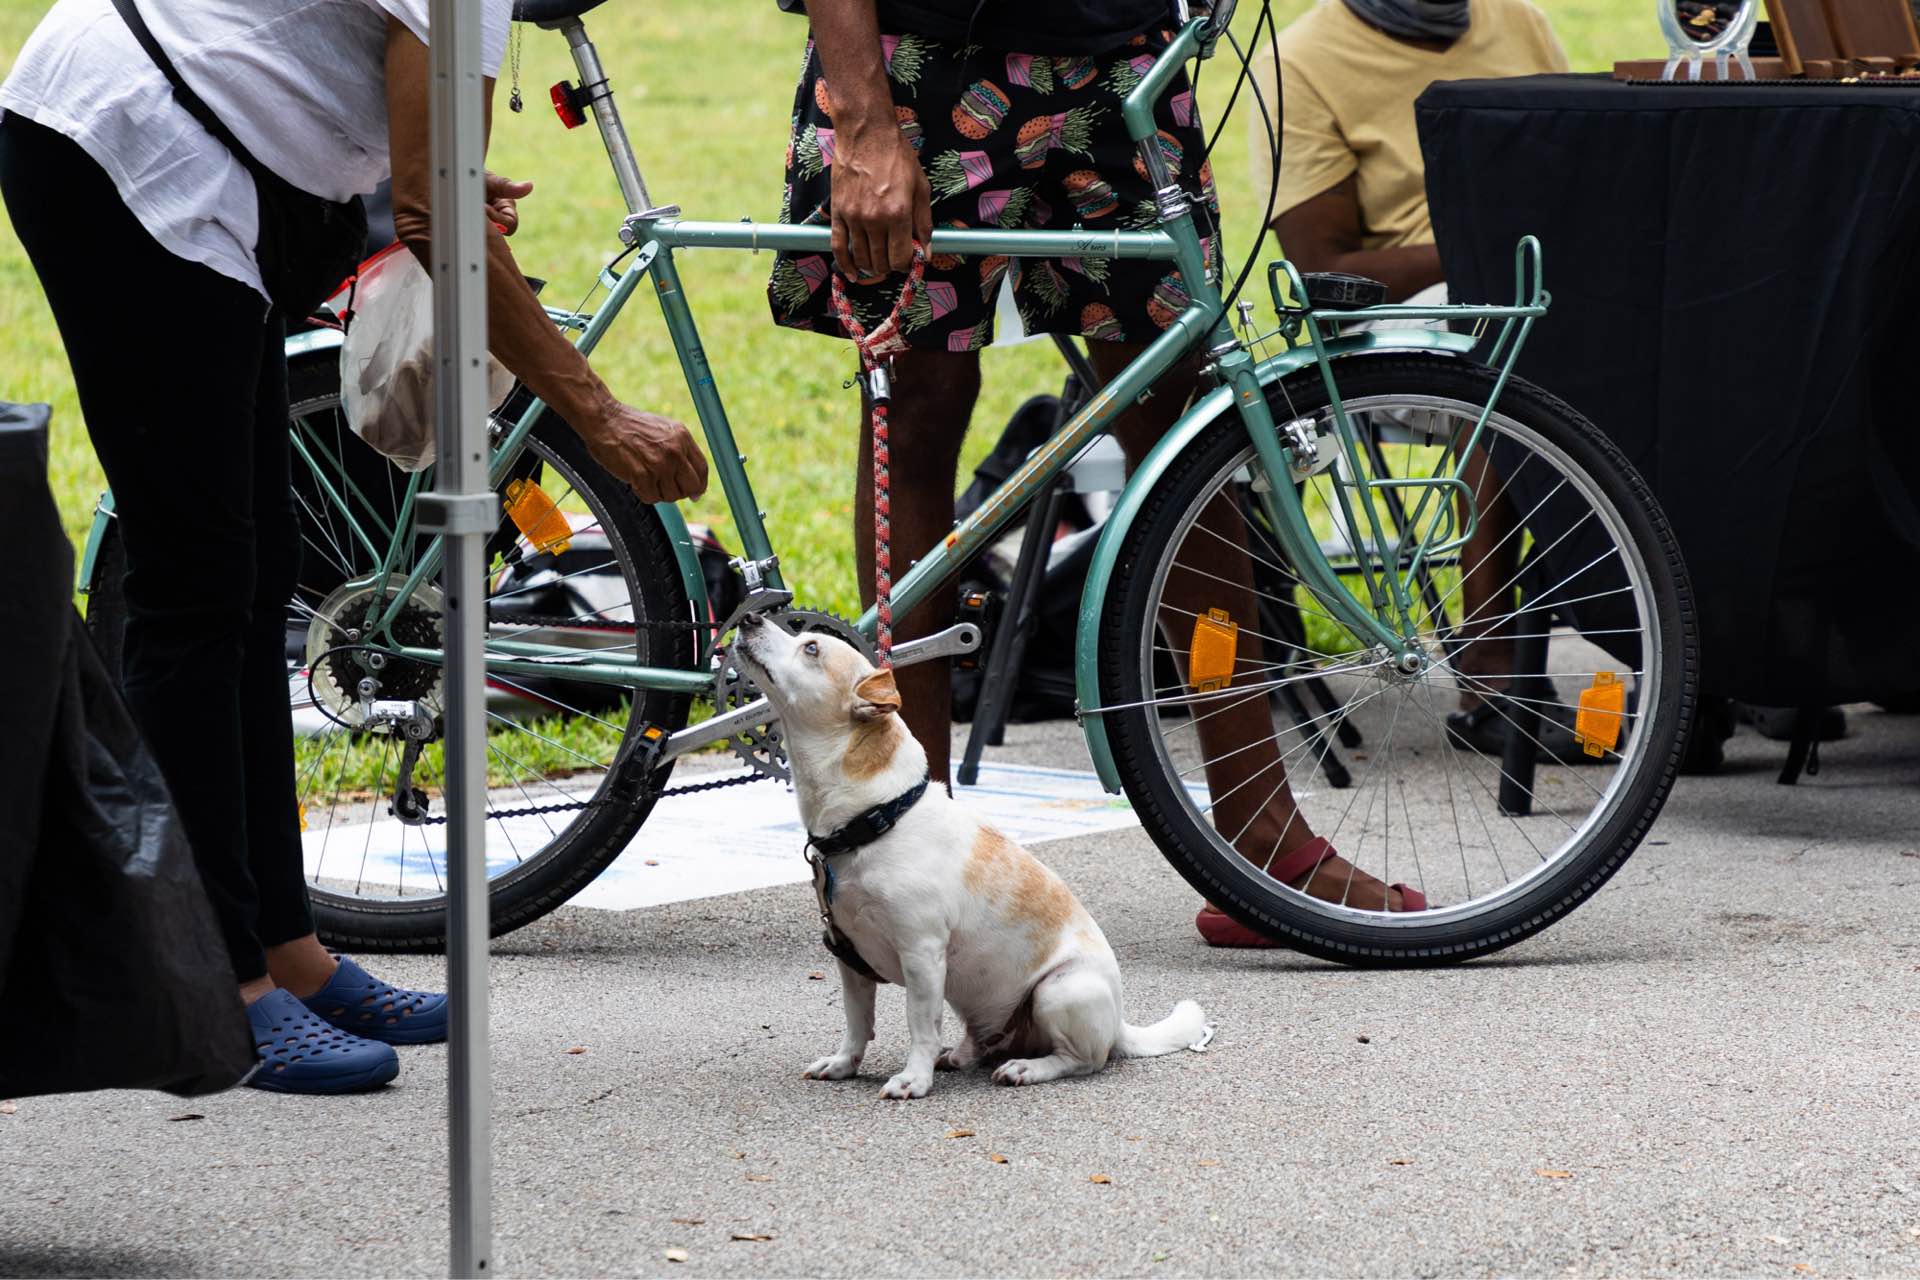 A friendly pup at the farmer’s market